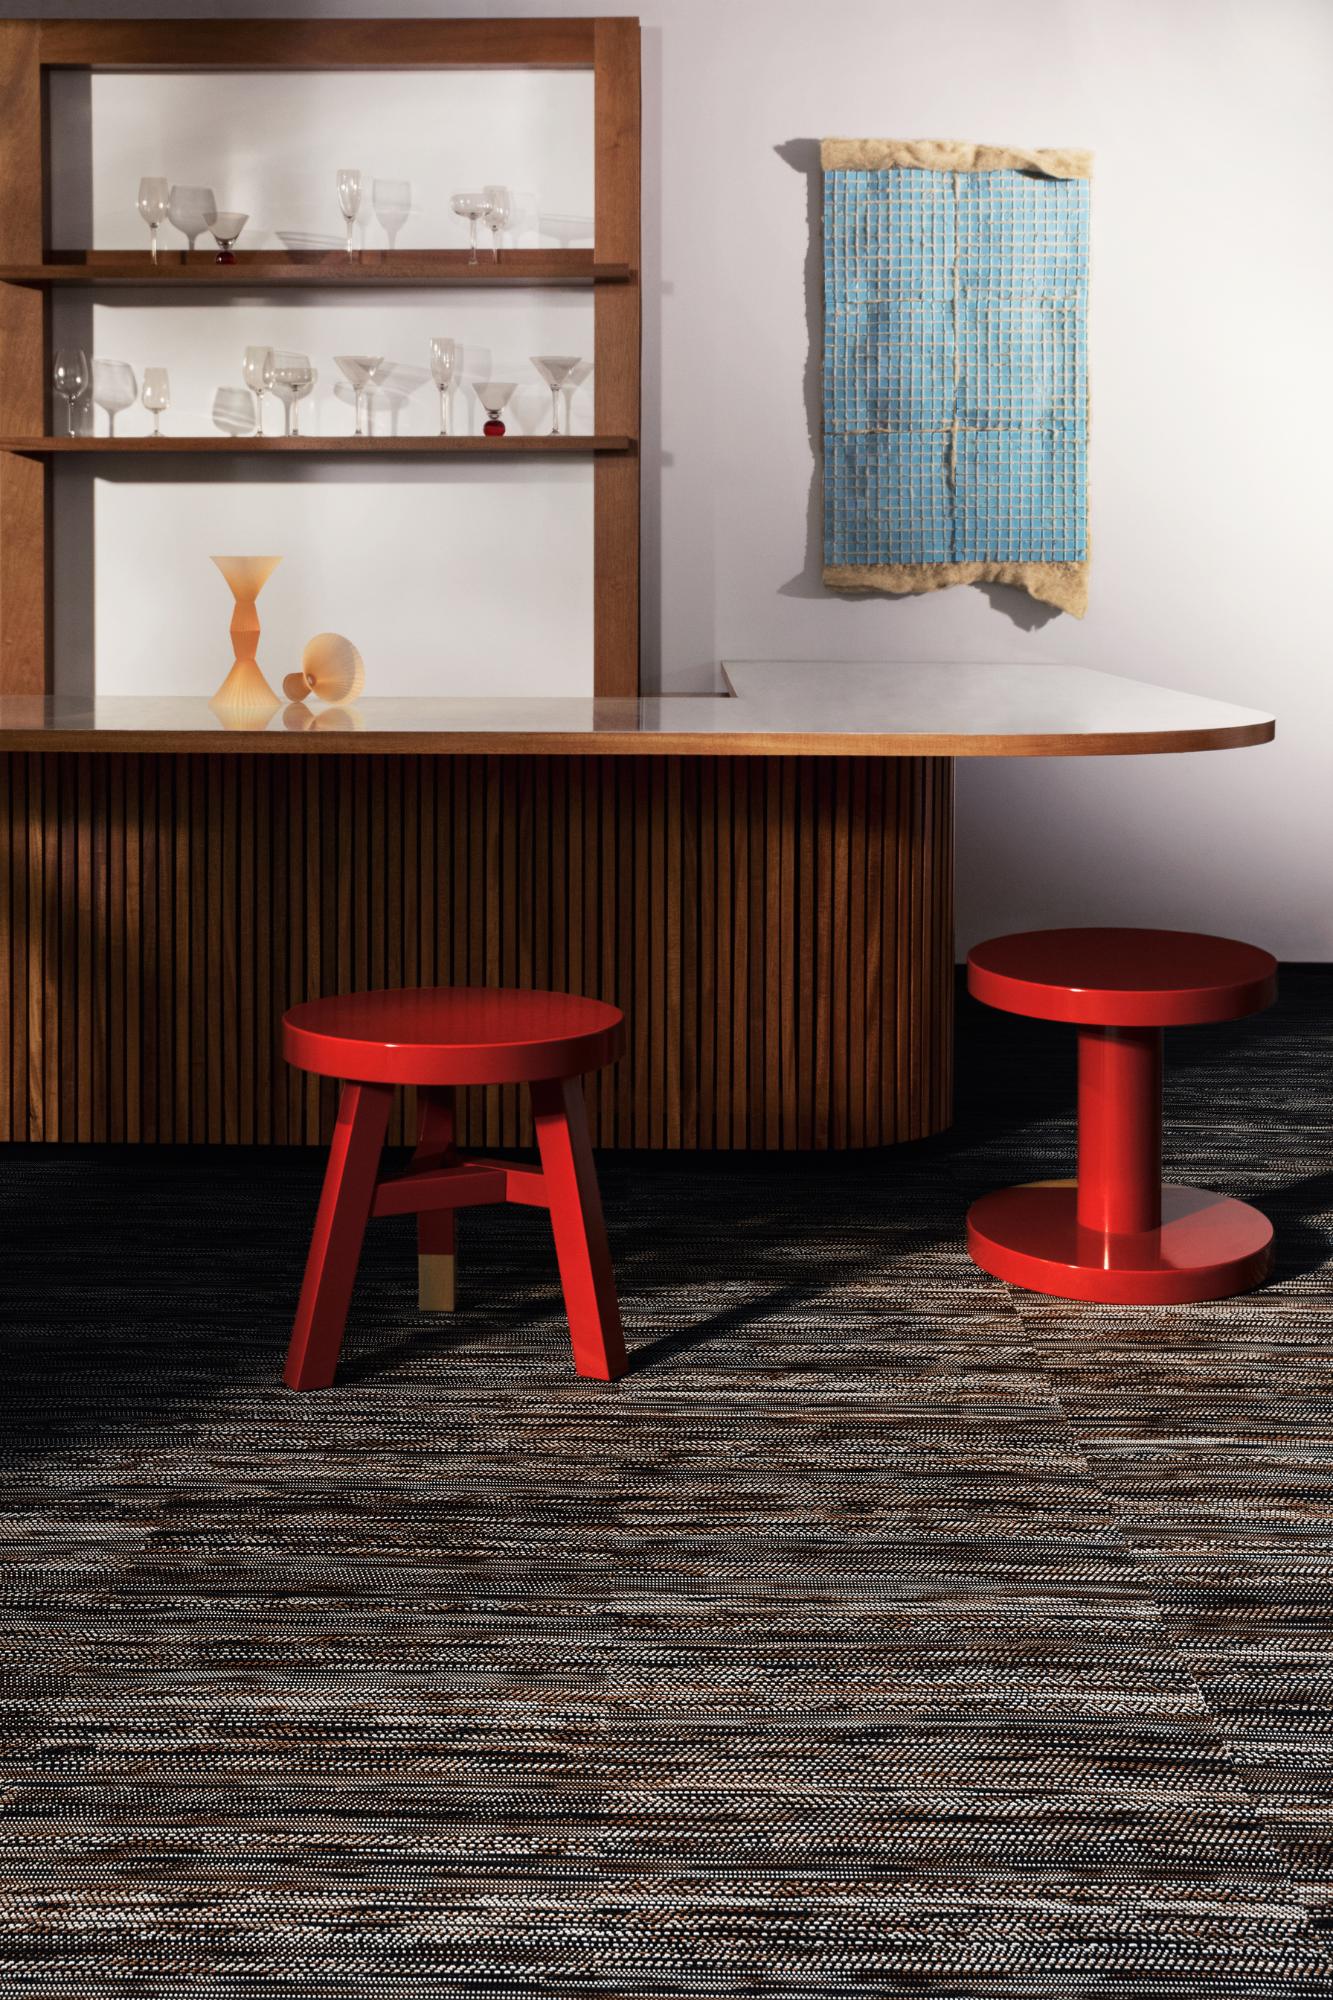 Graphic, Bolon’s Graphic: Timeless Classics for Any Space, a Collection That Stands the Test of Time